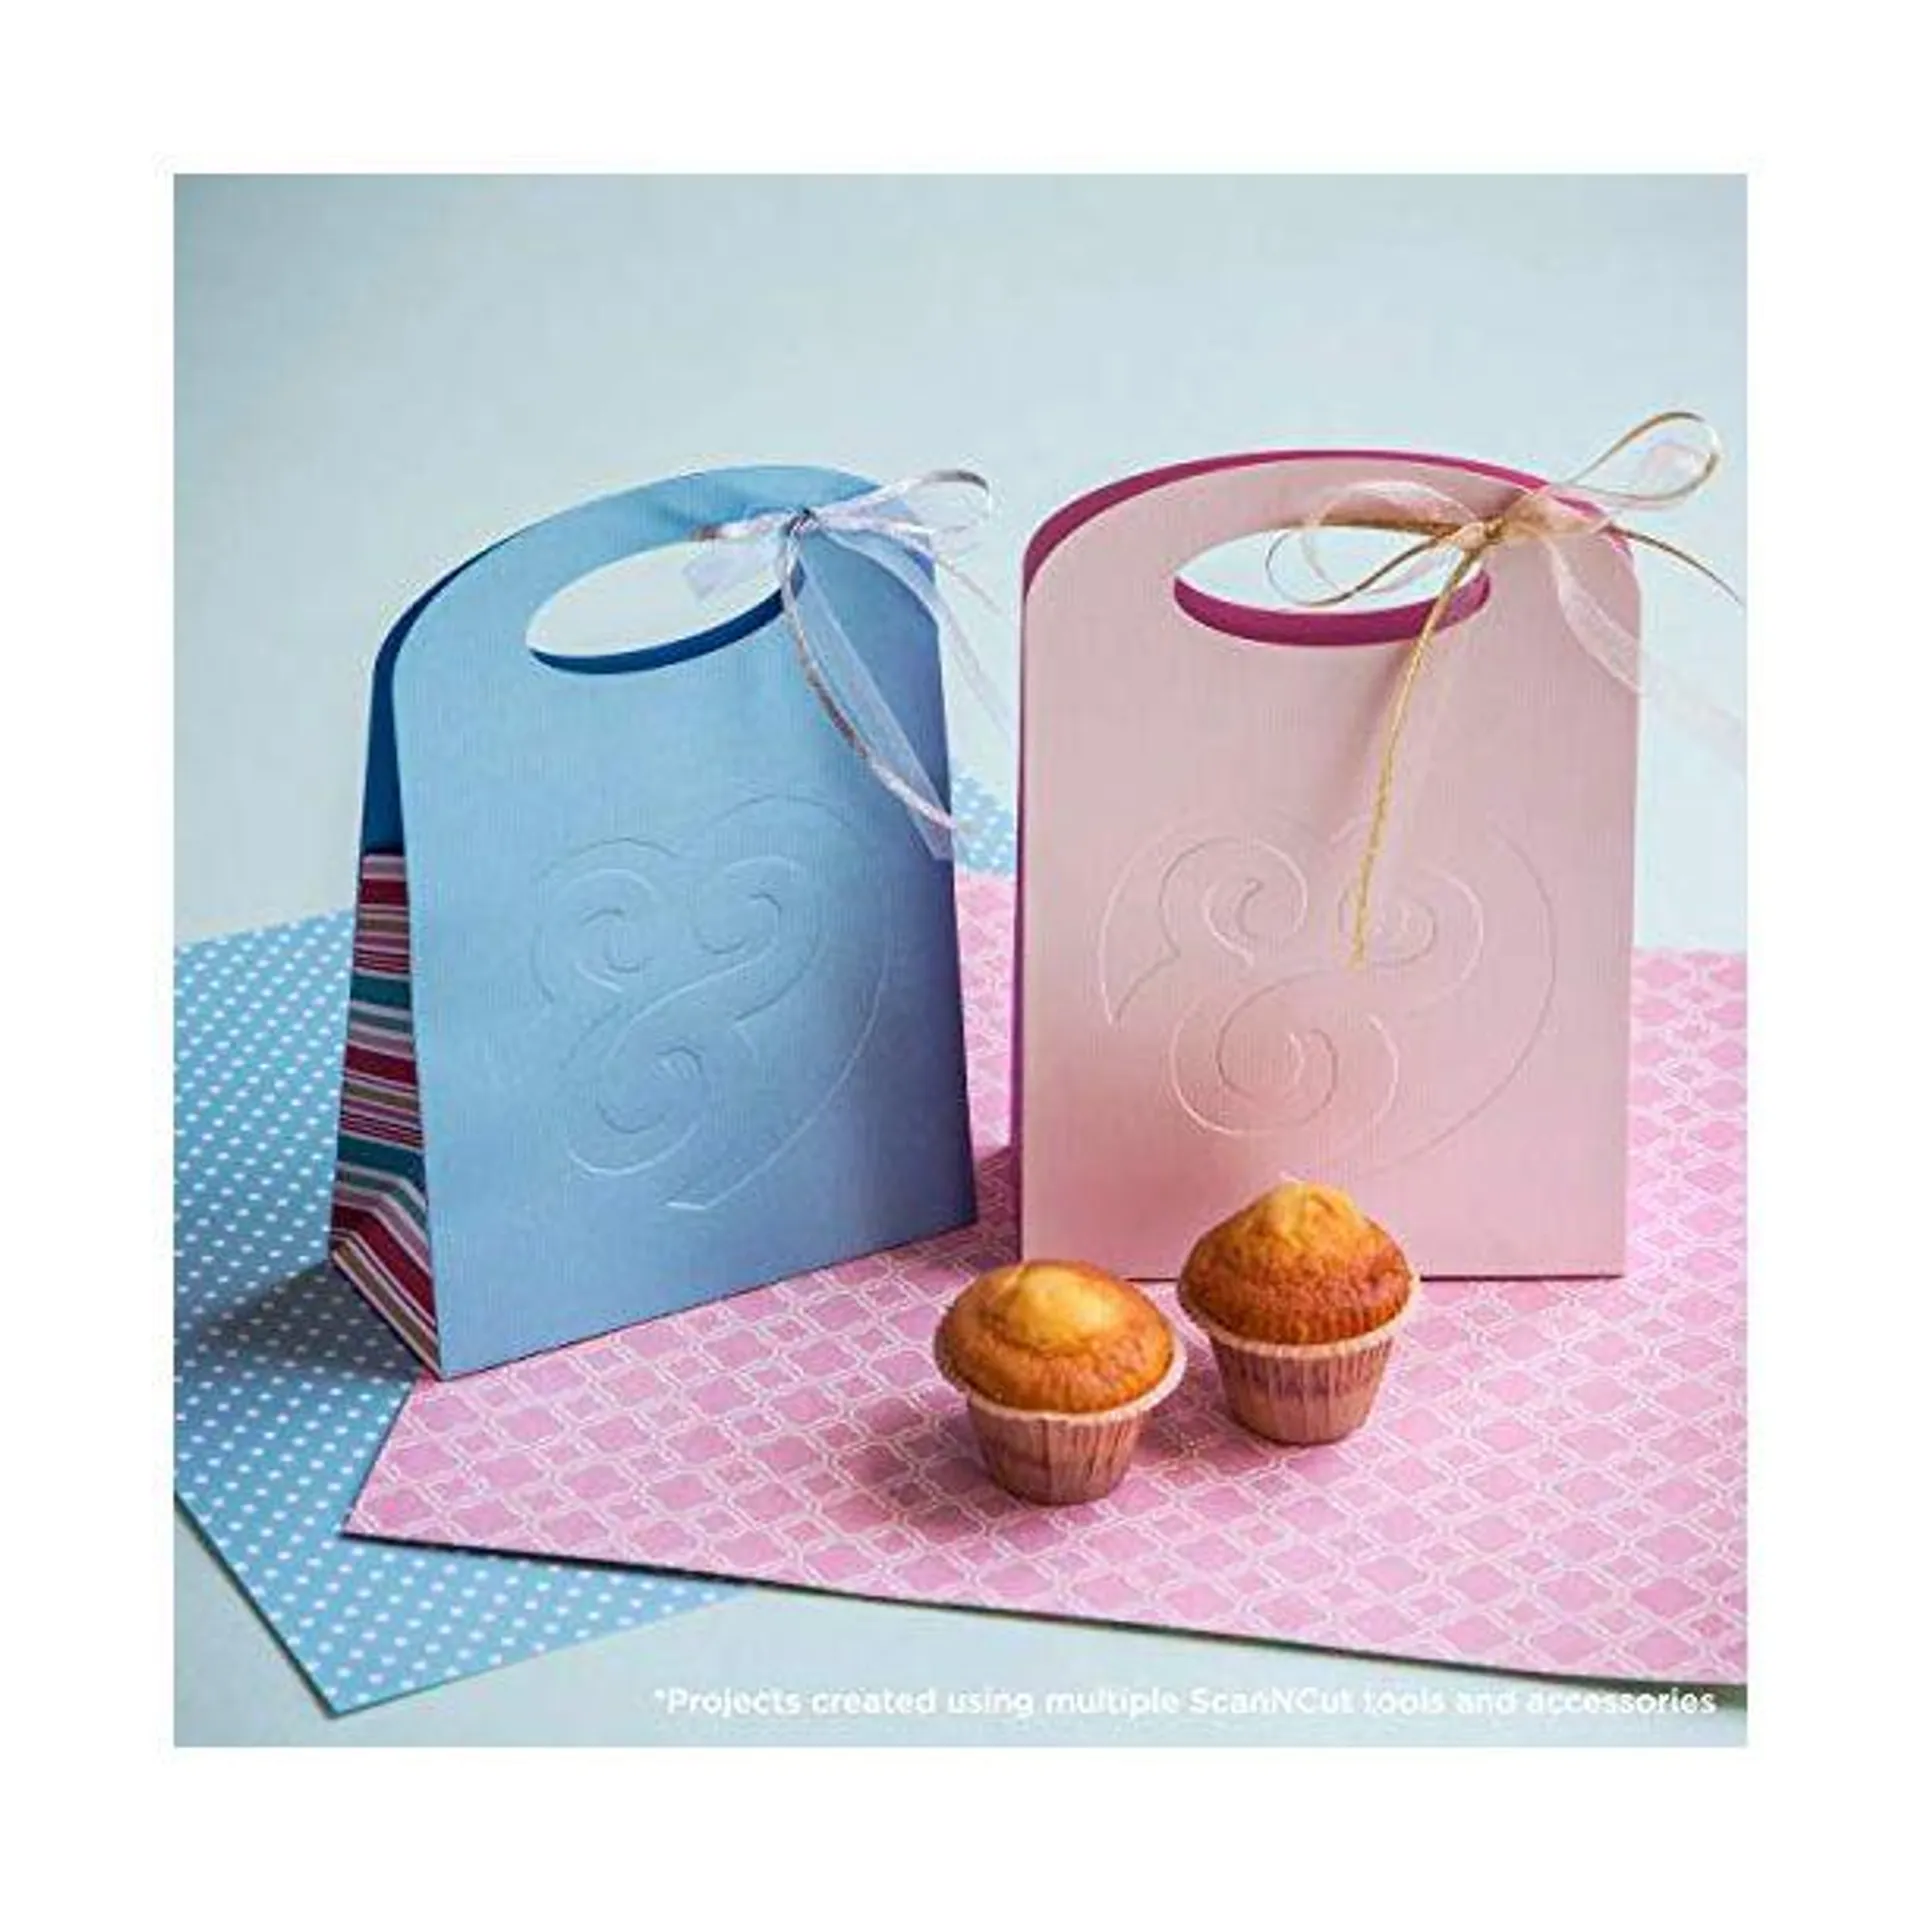 Brother ScanNCut Embossing Starter Kit CAEBSKIT1 - Accessory Set with Mat - Tools - Metal Sheets and 50 Embossing Patterns for DIY Cutting Machine